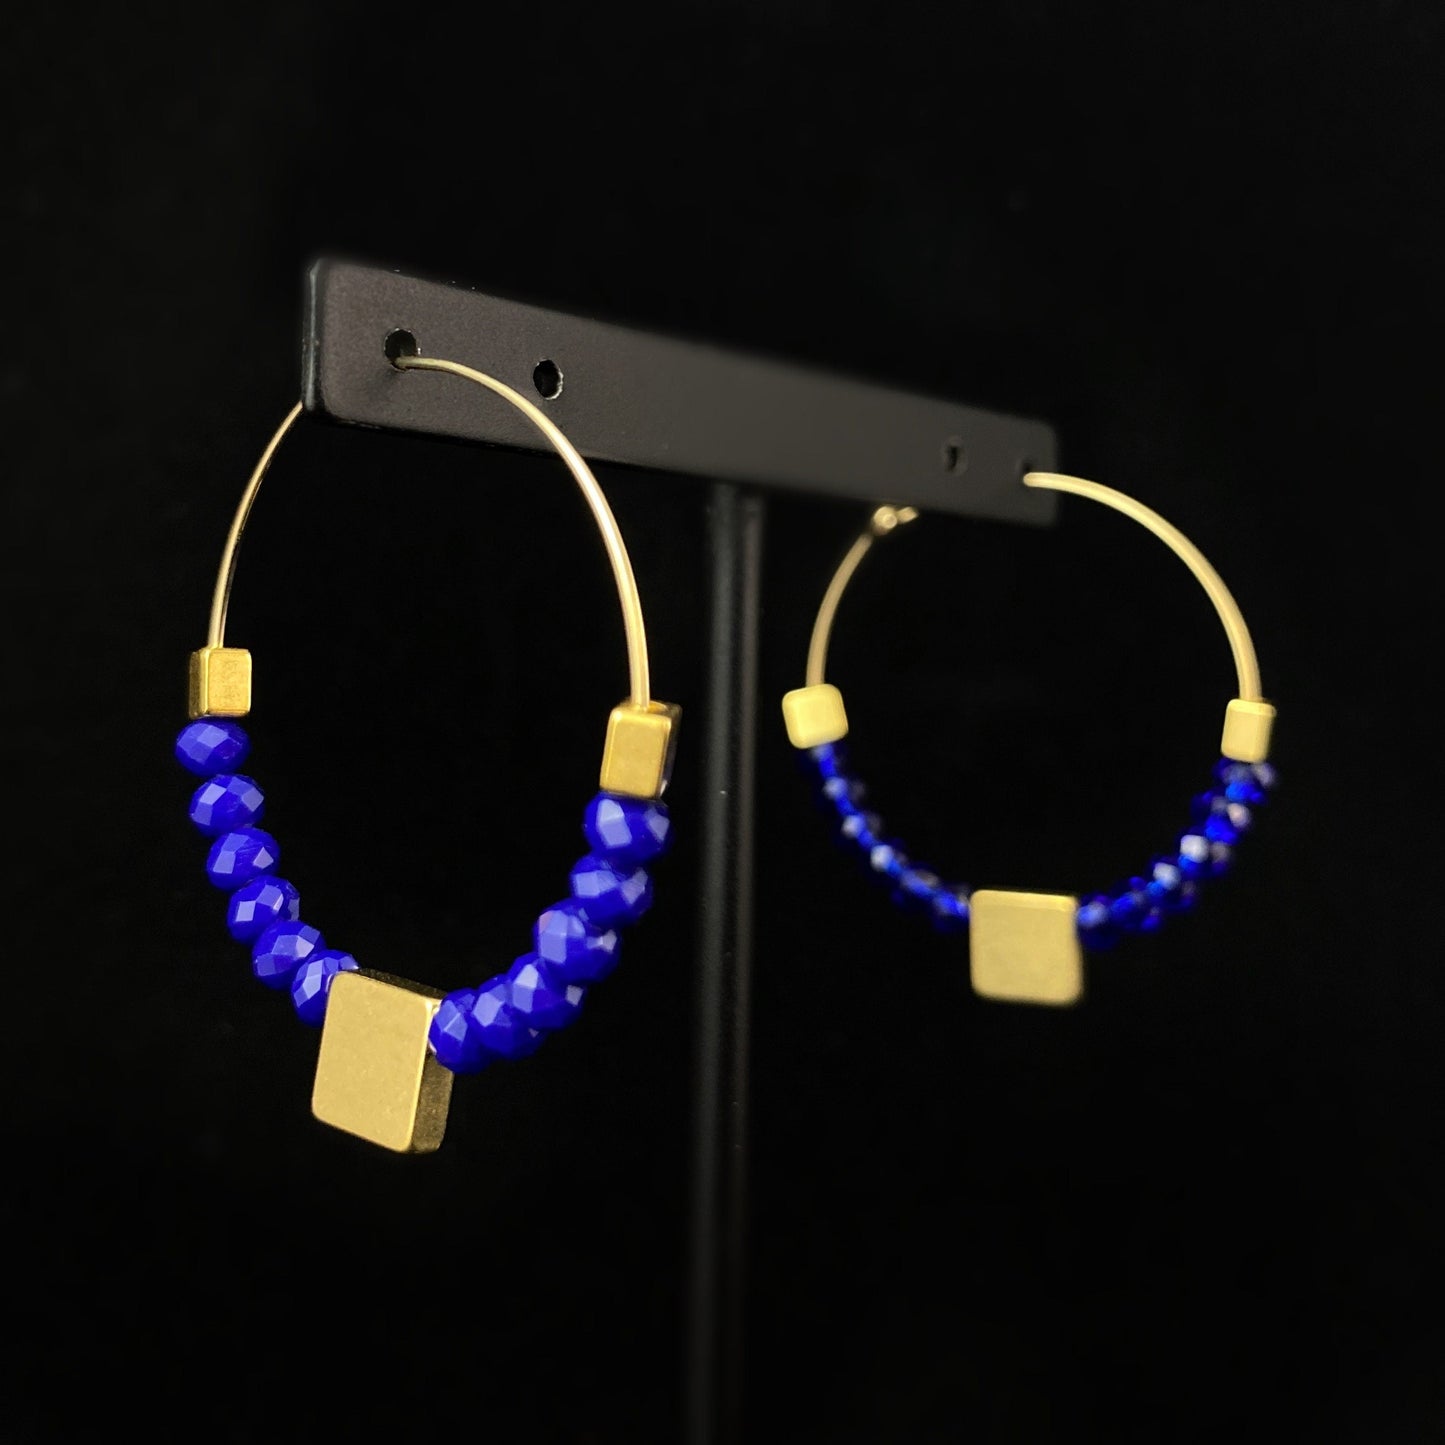 Gold and Blue Statement Hoop Earrings - 18kt Gold Over Brass with Blue Glass Beads, David Aubrey Jewelry